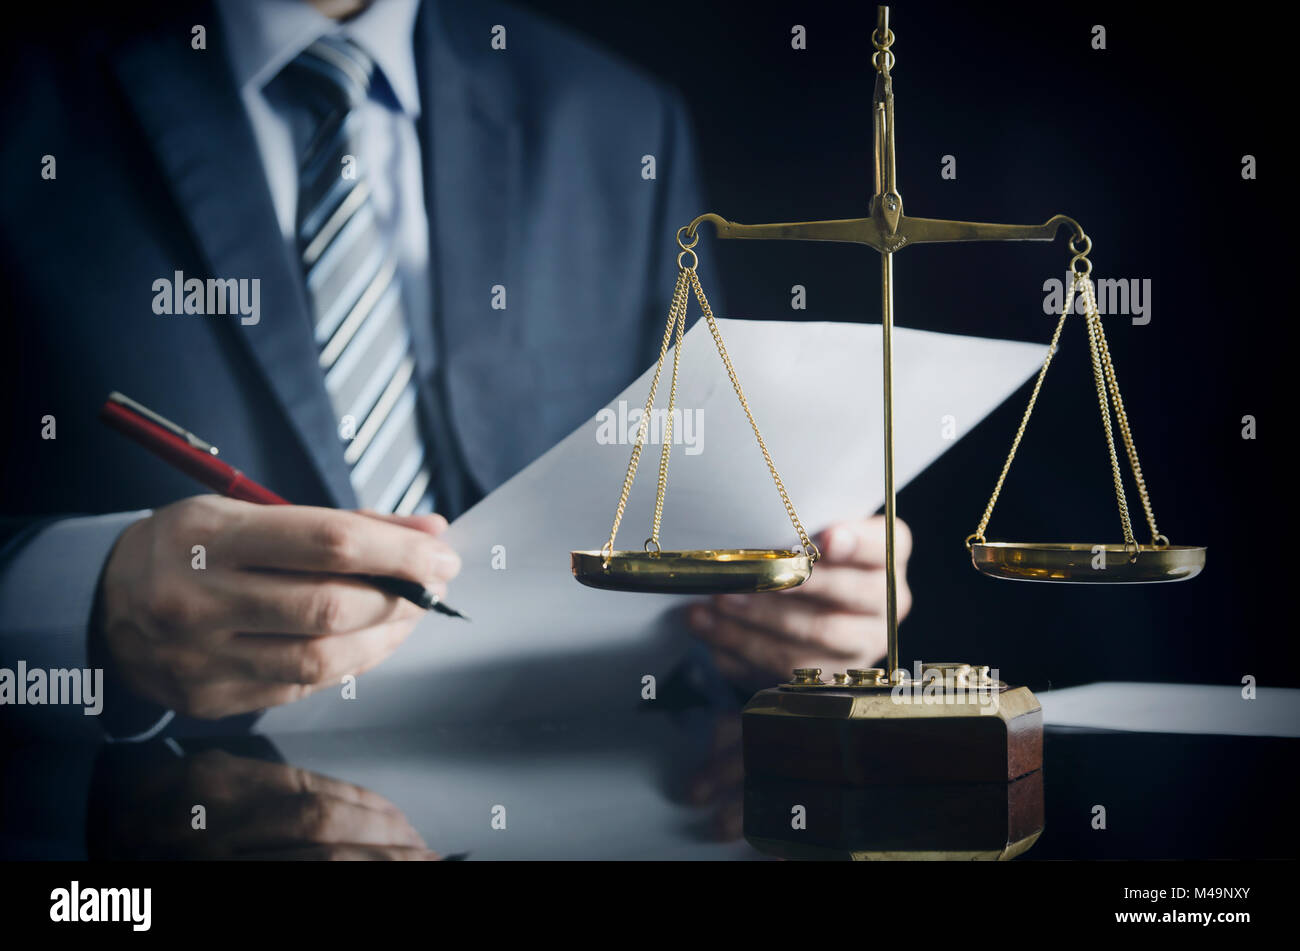 Lawyer or attorney works in his office. Scales on the desk Stock Photo